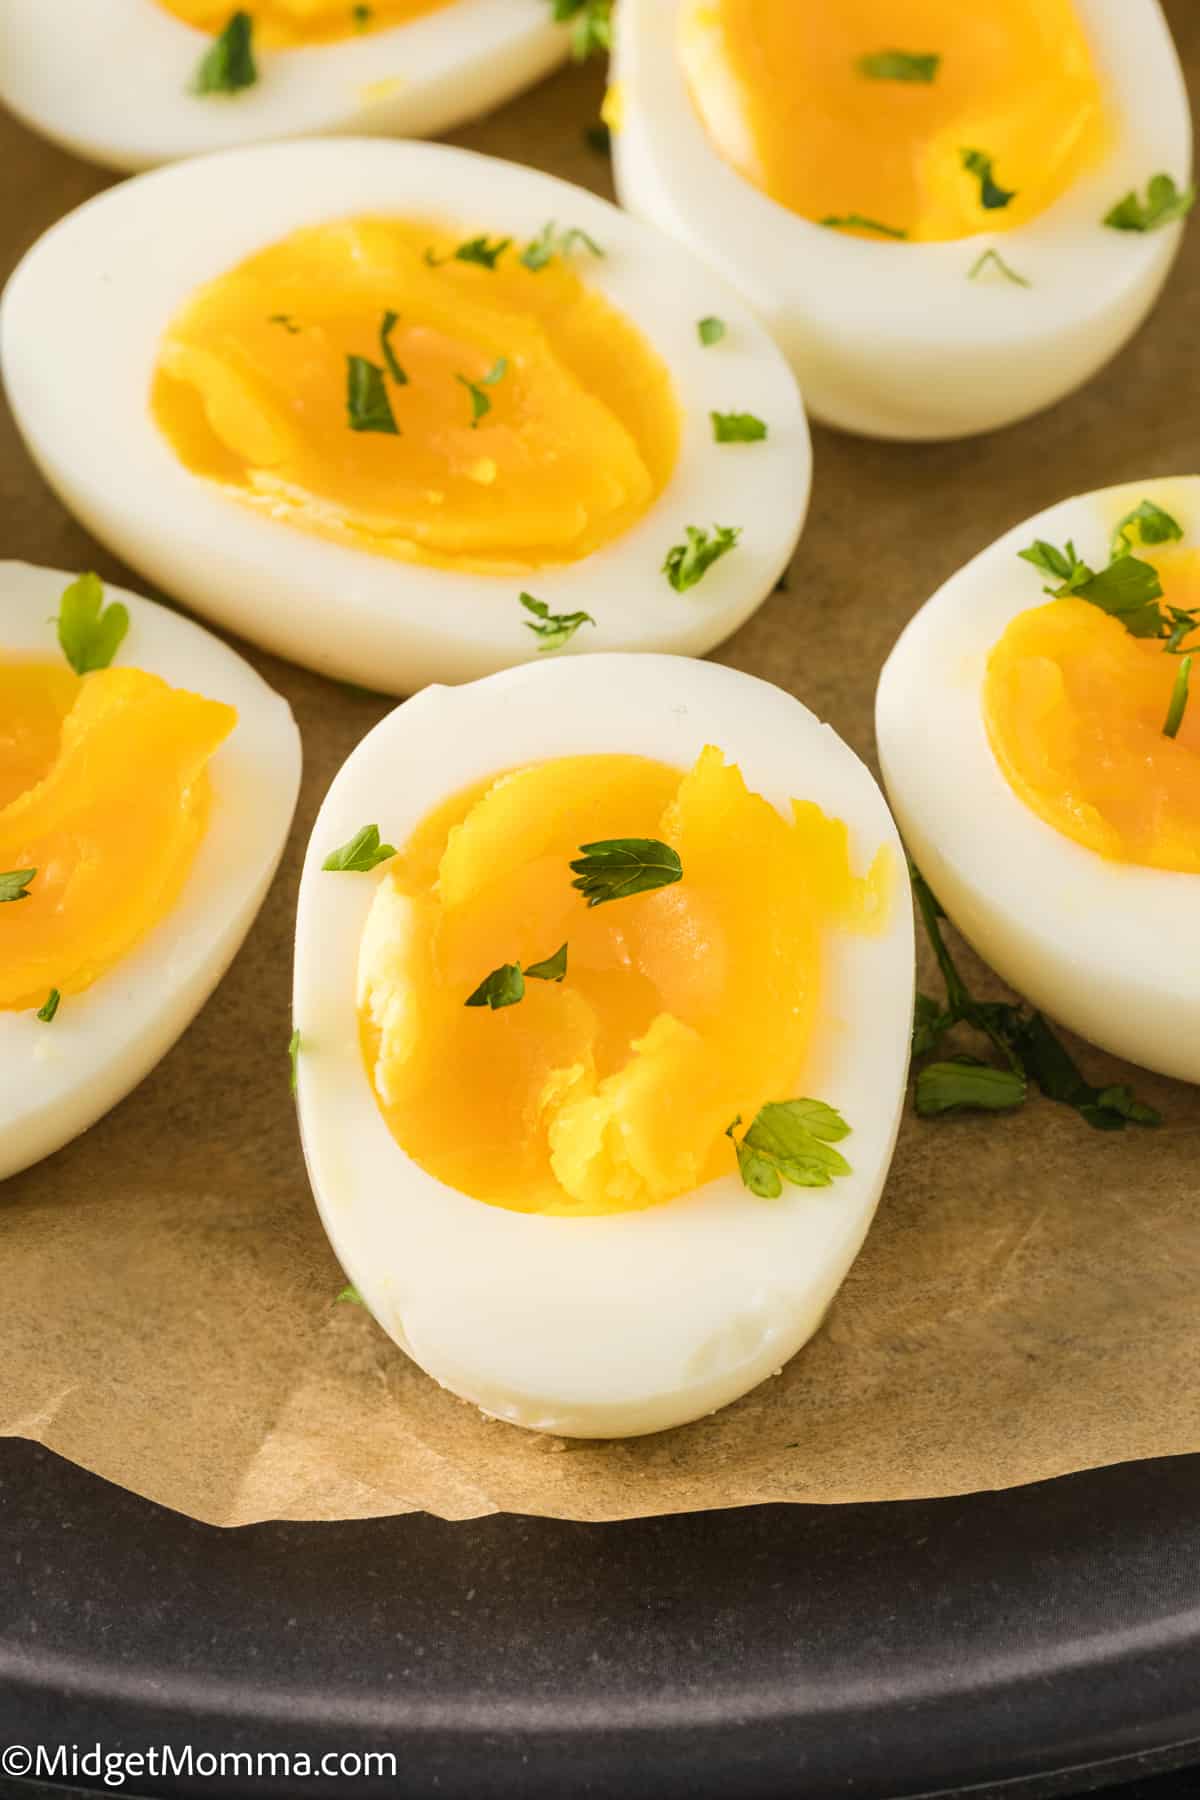 How to Make the Jammiest, Soft-Boiled Egg Ever